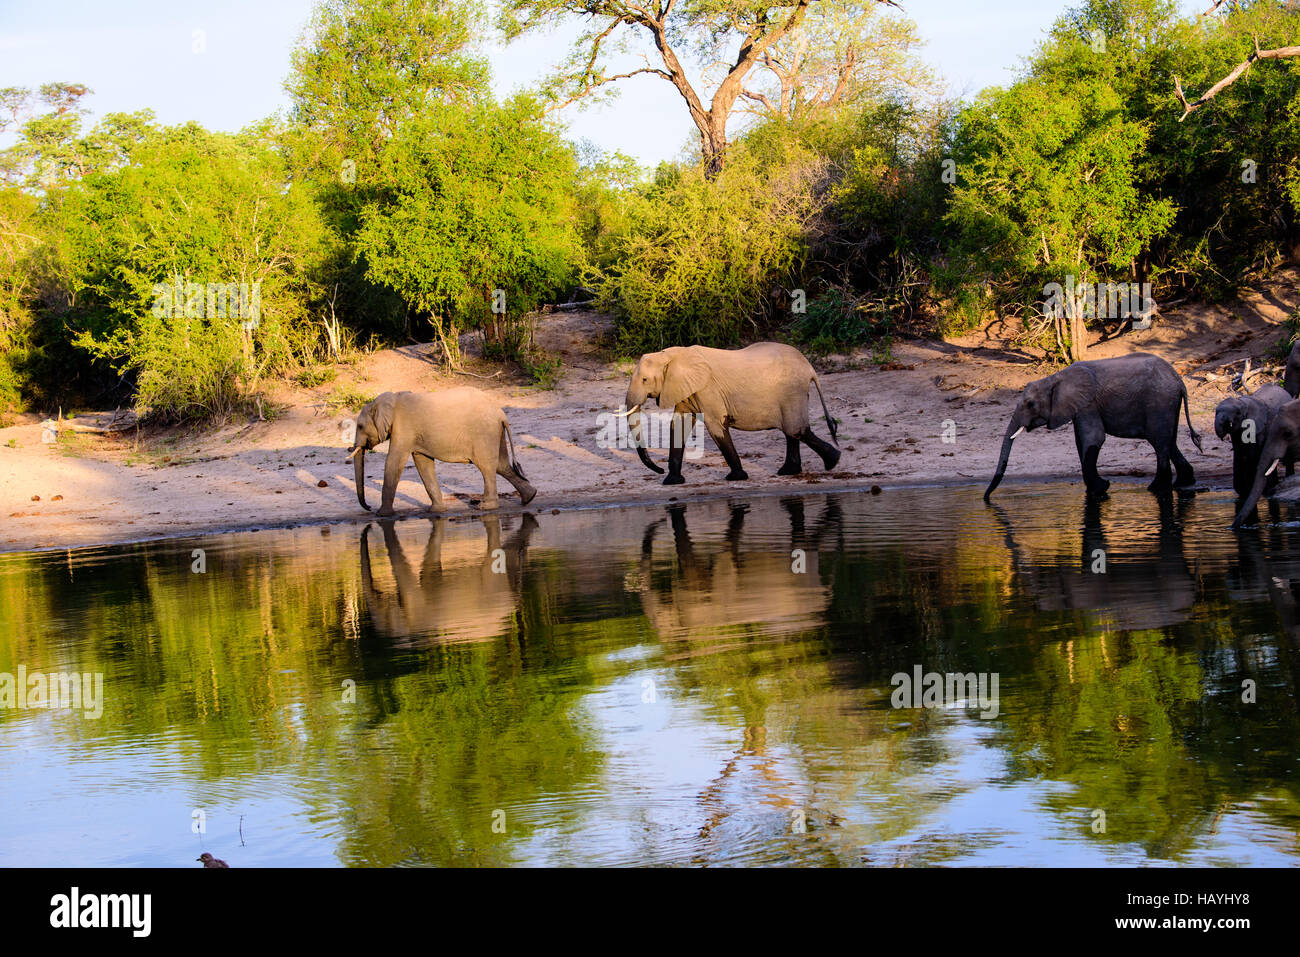 Elephants and their reflections walking around the waterhole Stock Photo